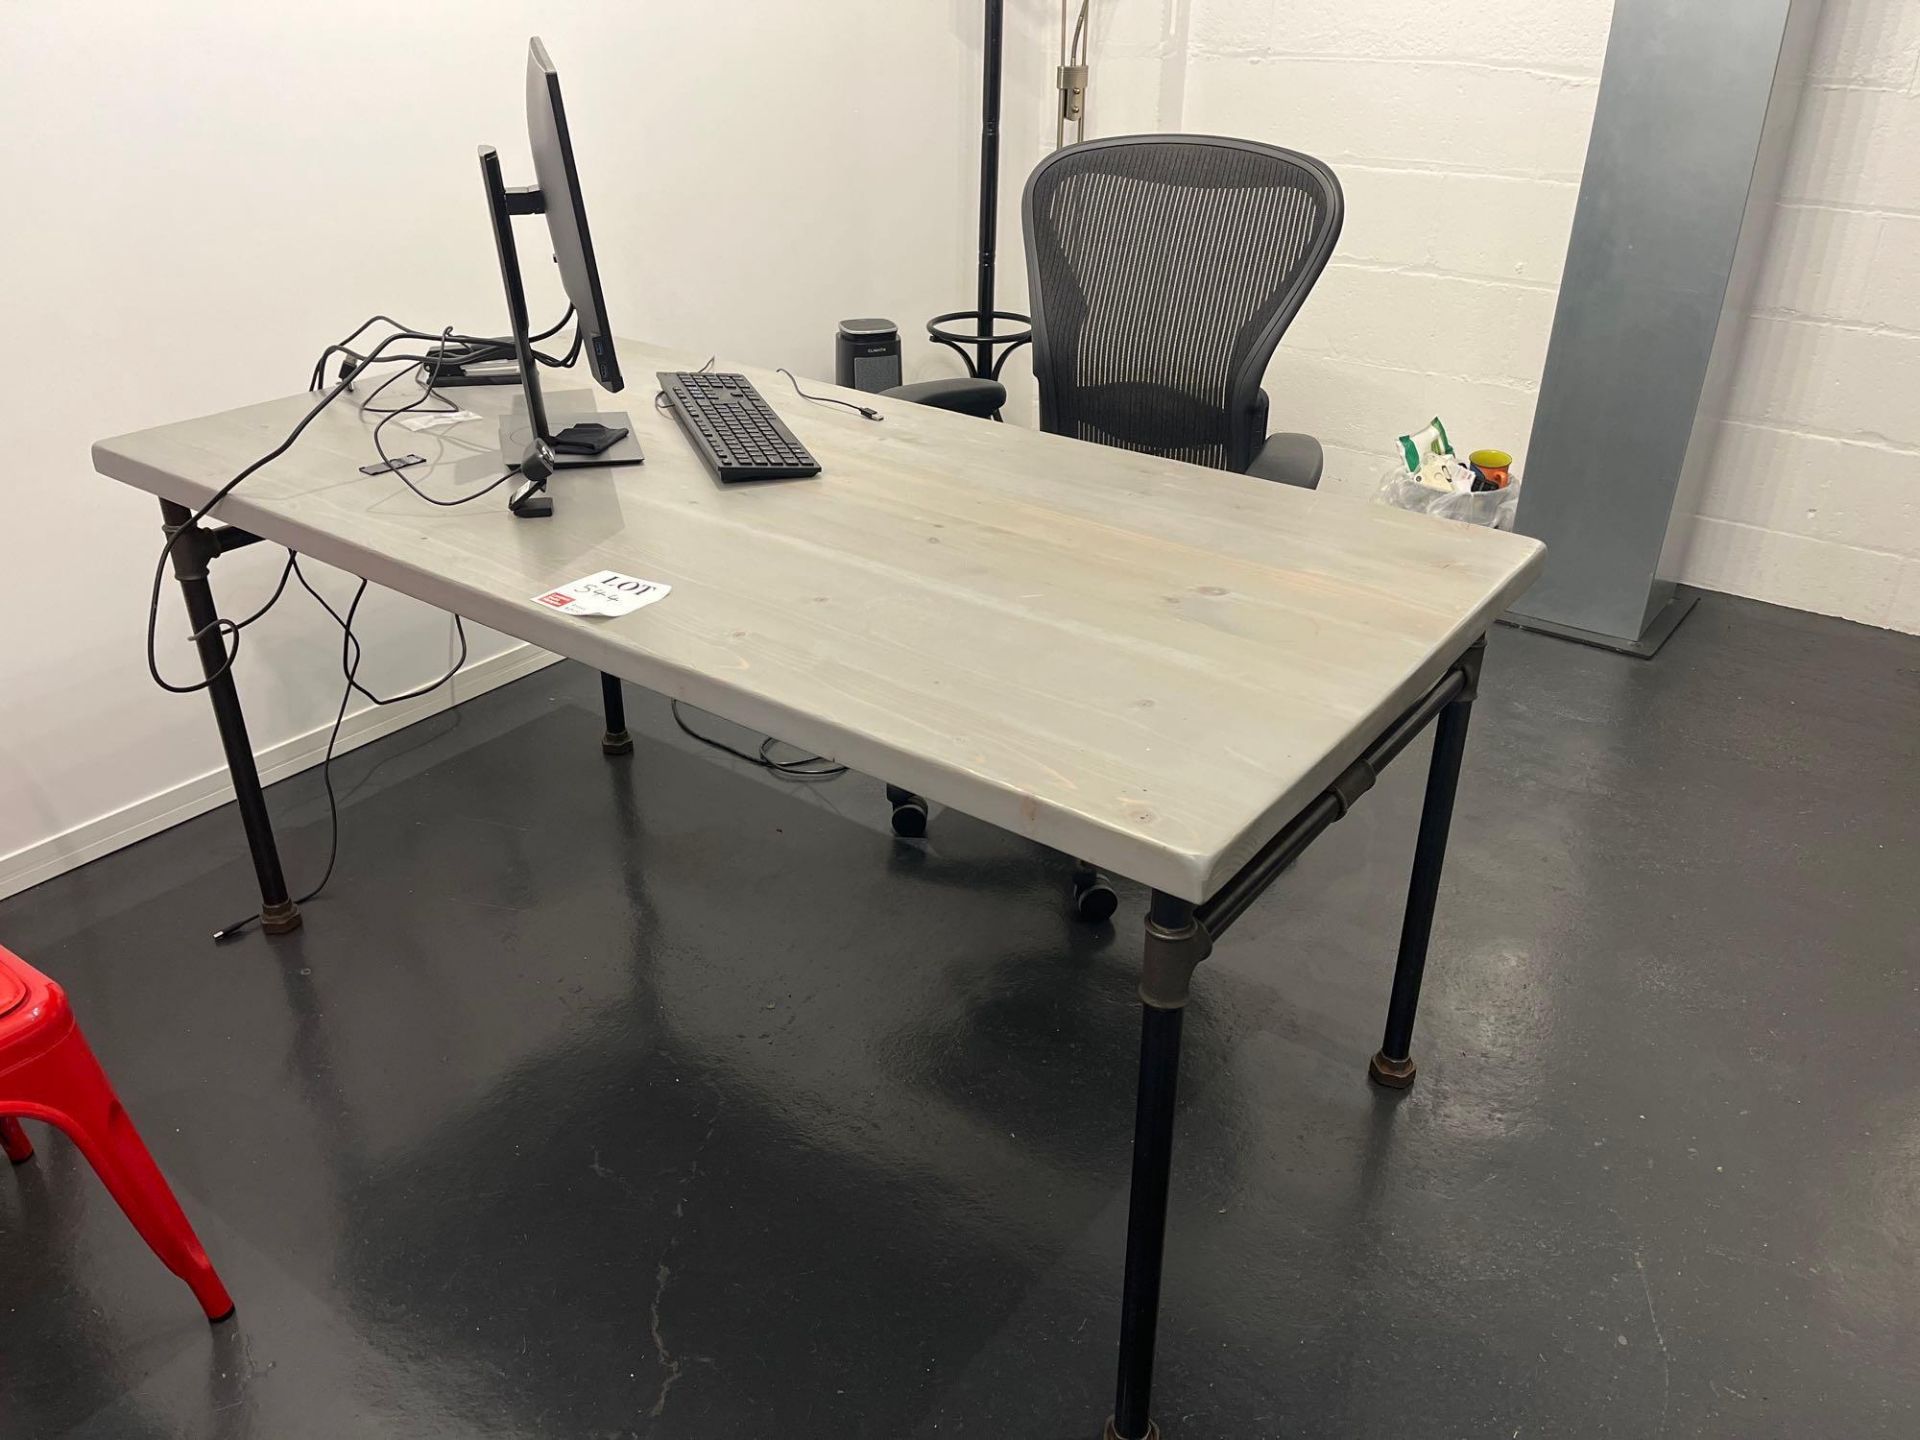 Bespoke industrial style wood top table with Dell P2419H monitor and black mesh back operator chair